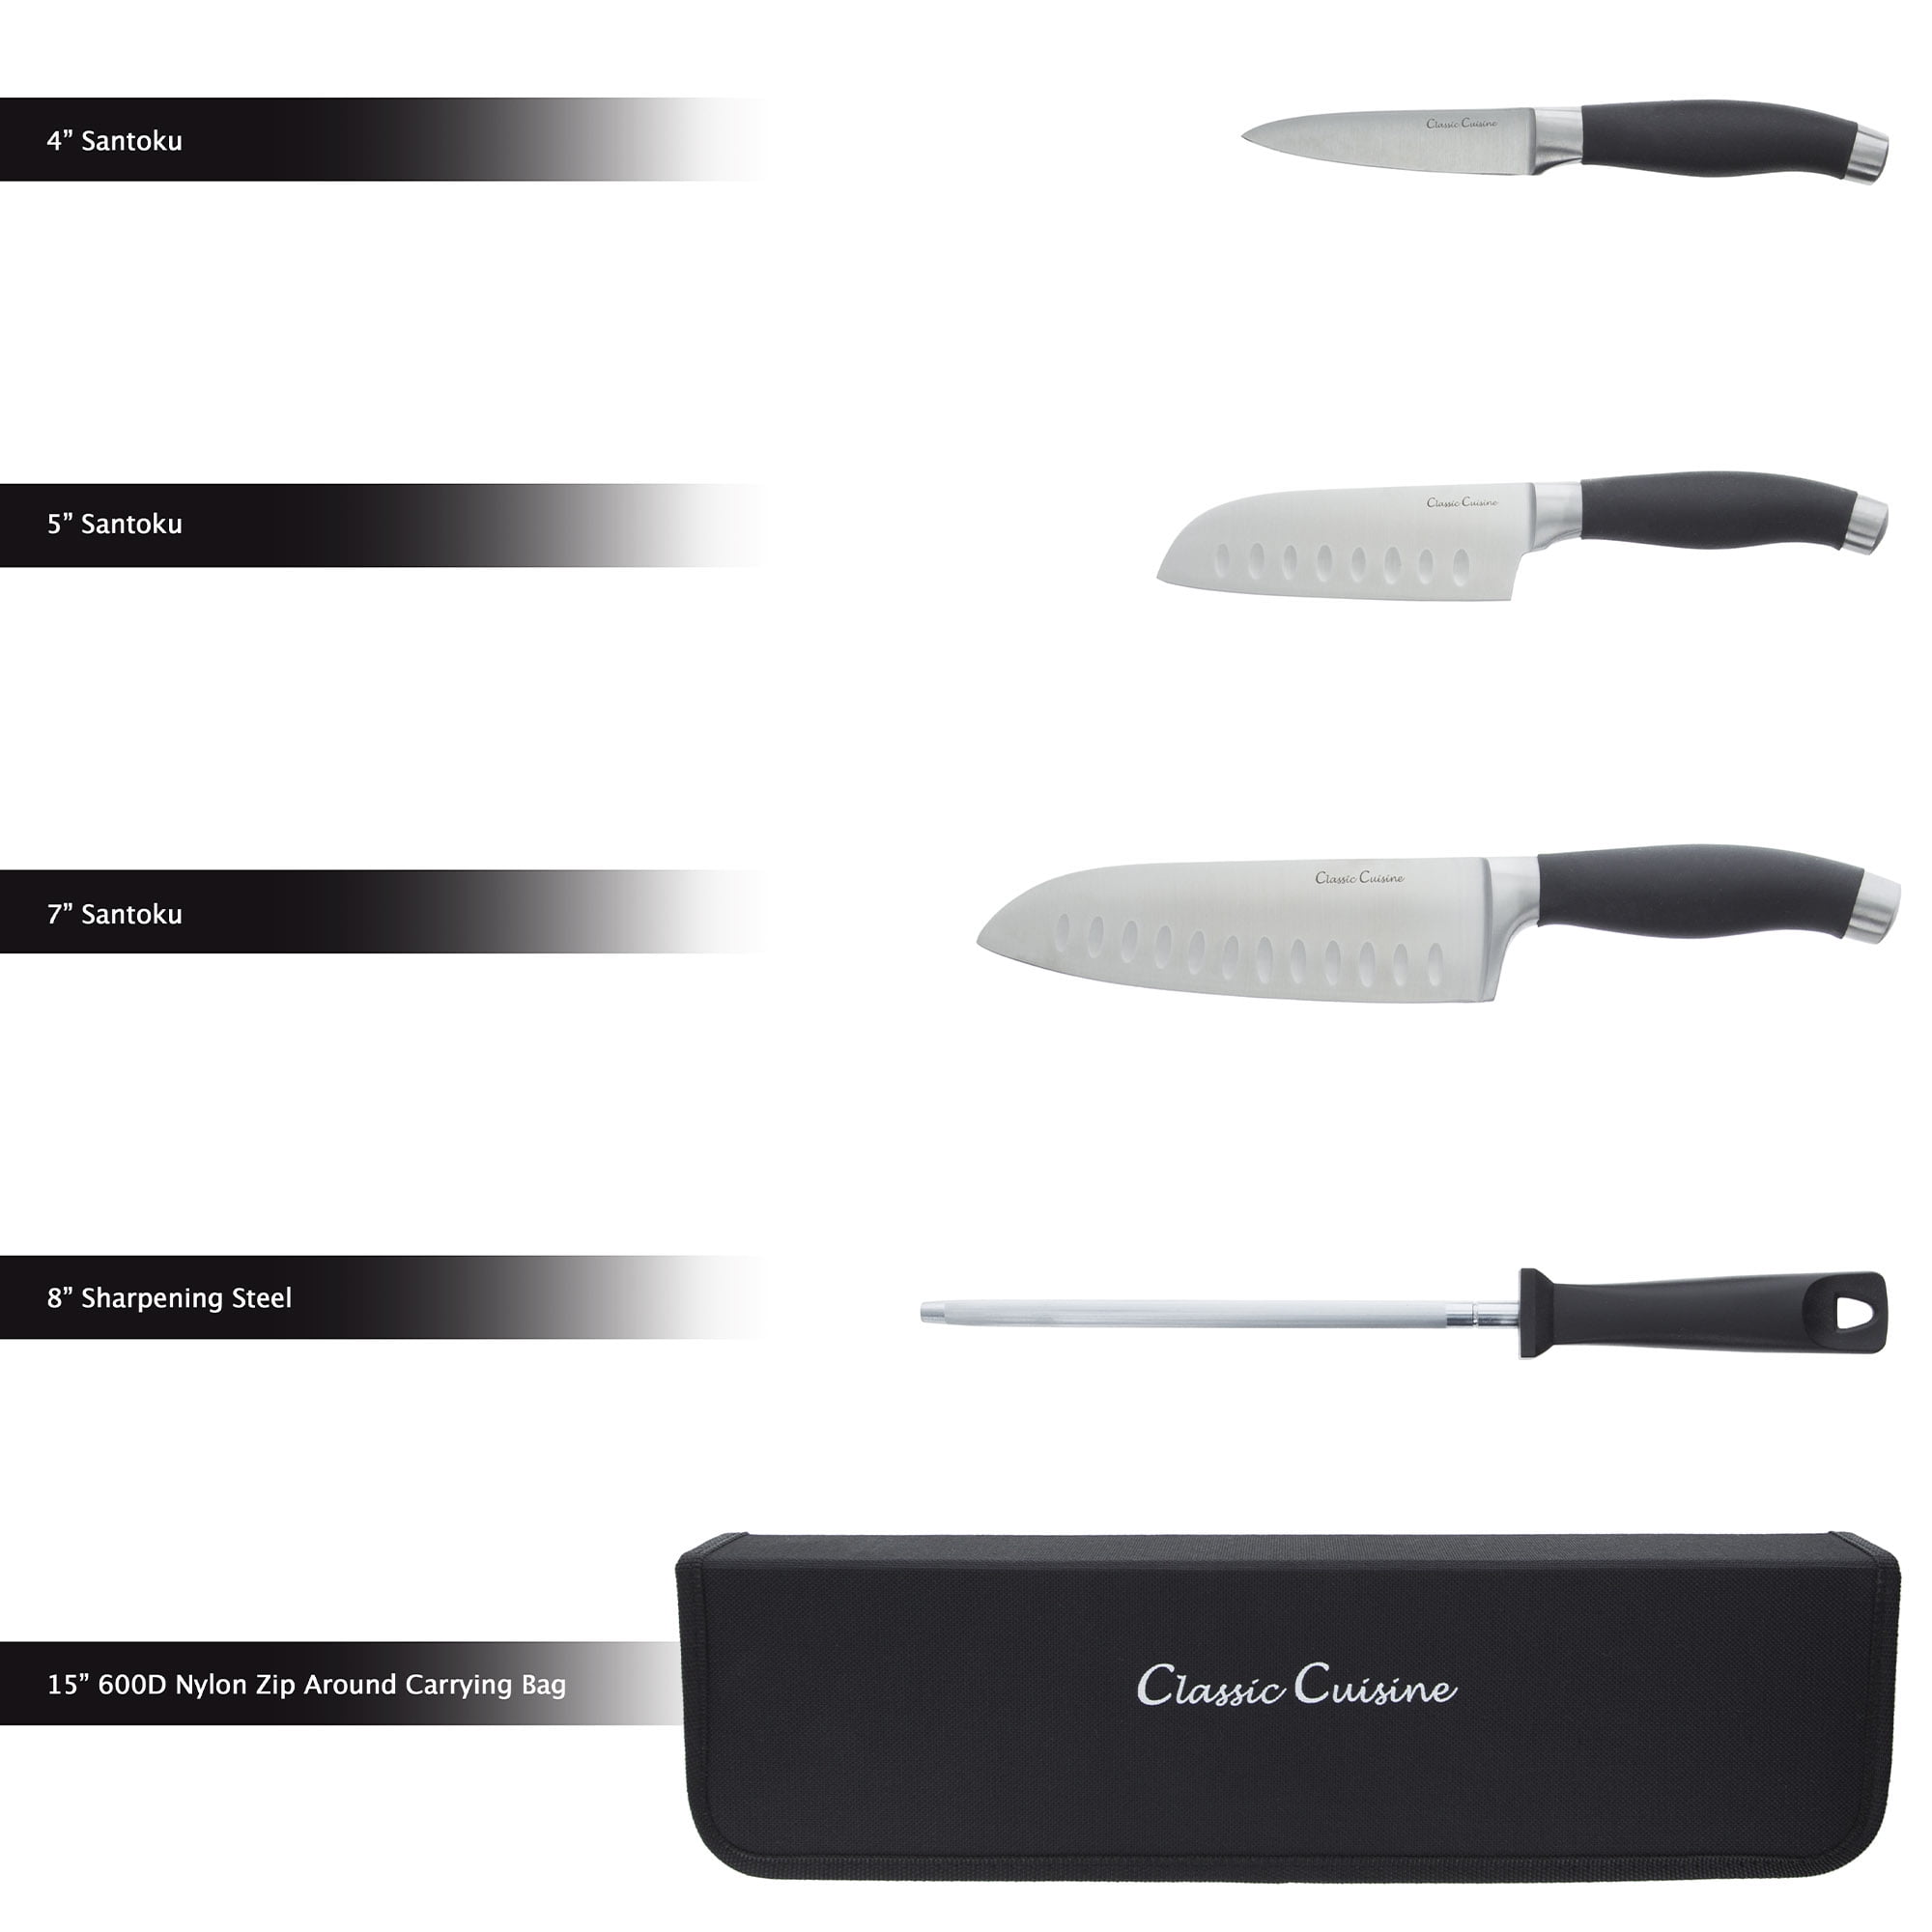 BINO 5-Piece Stainless Steel Kitchen Knives Set with Sheath - Marble